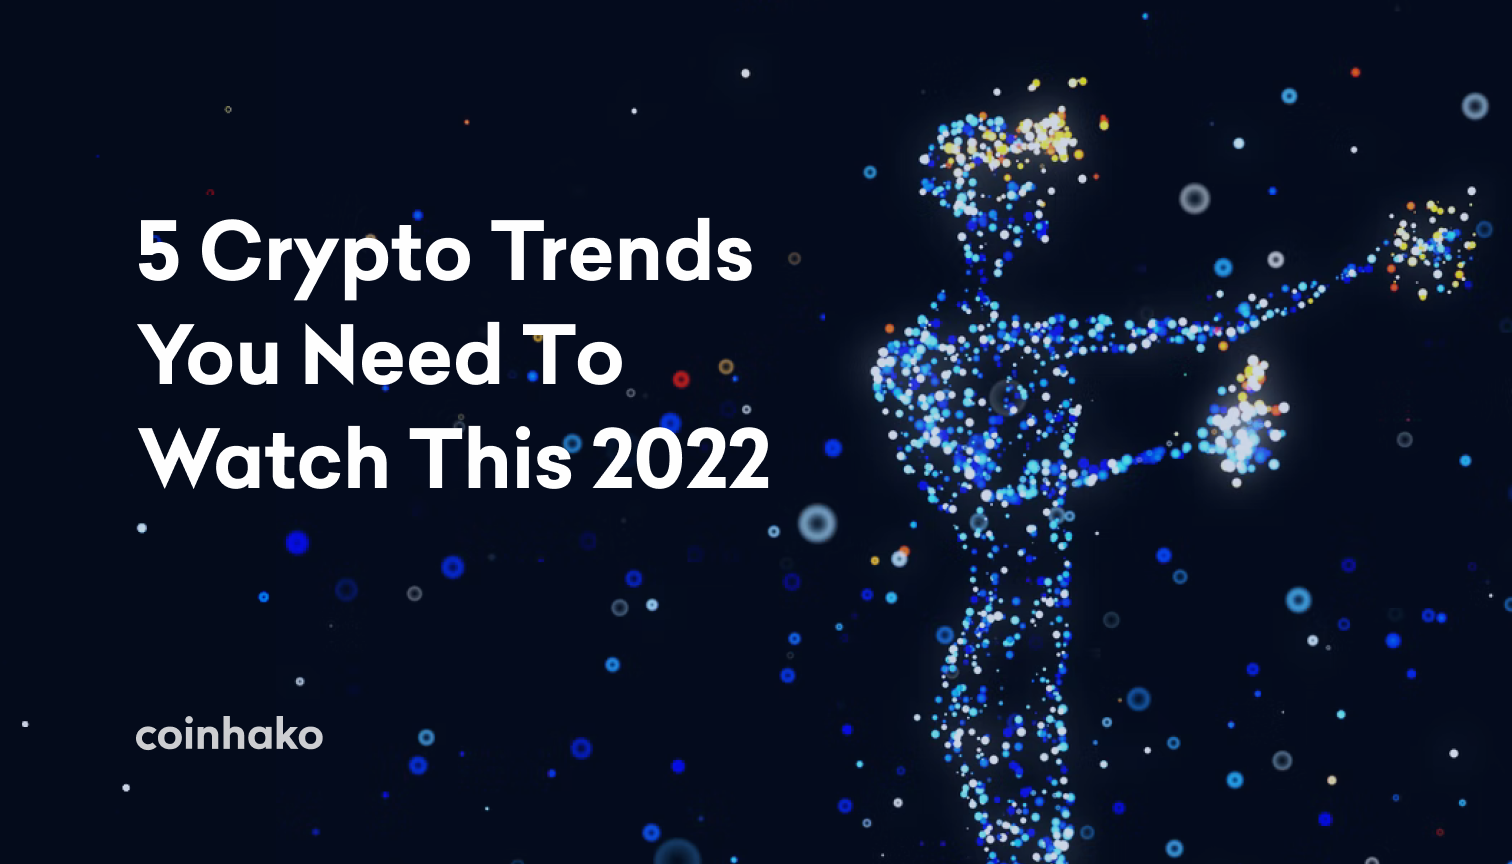 5 Crypto Trends You Need To Watch This 2022